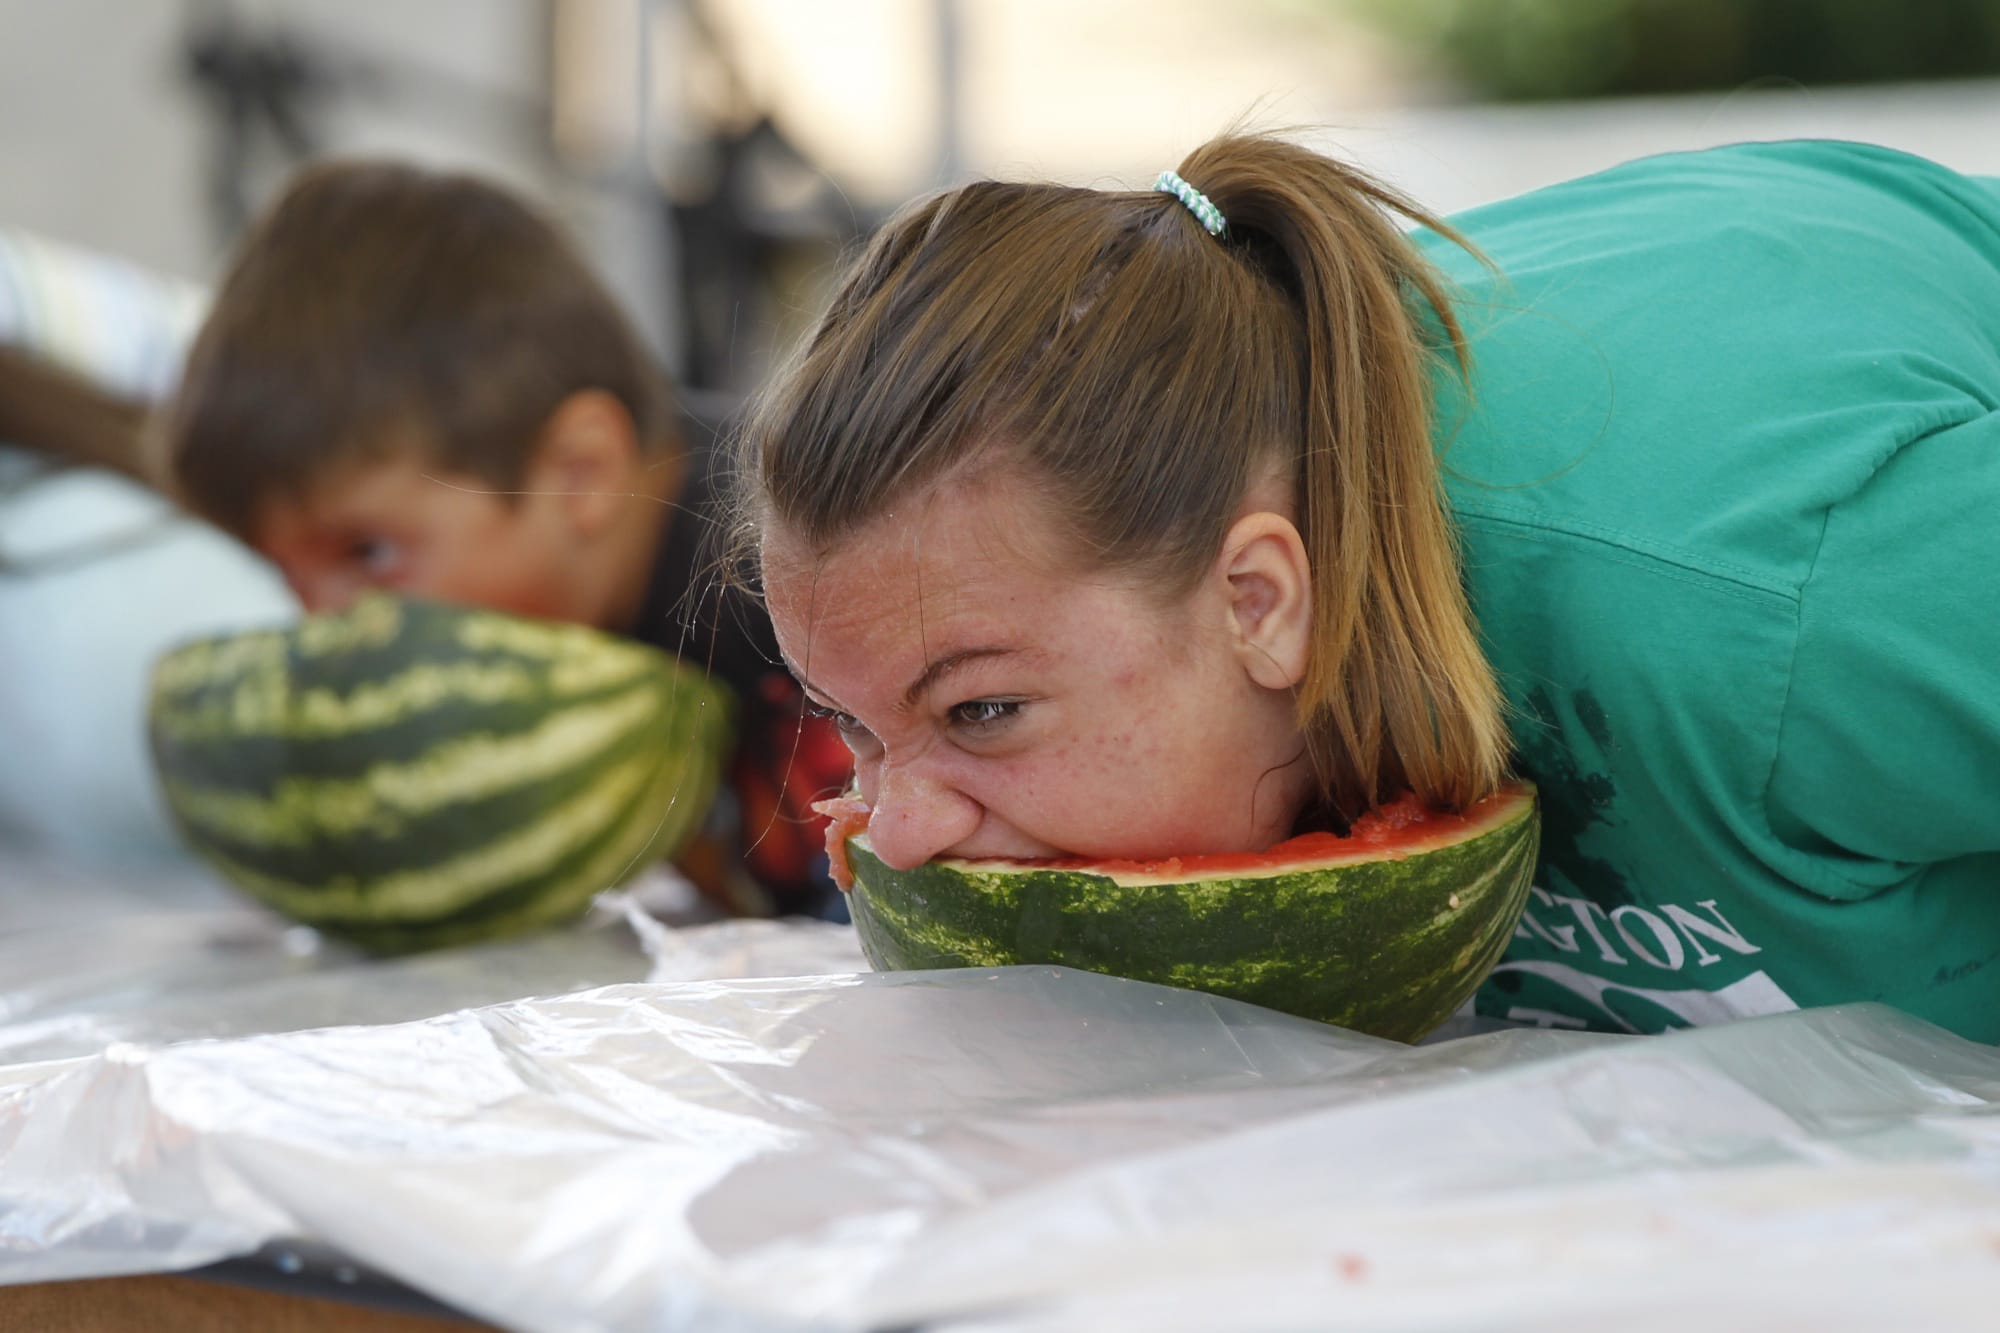 Danielle Gawronski, 14, of La Center competes in the watermelon eating contest at the Clark County Fair. Gawronski took third place.